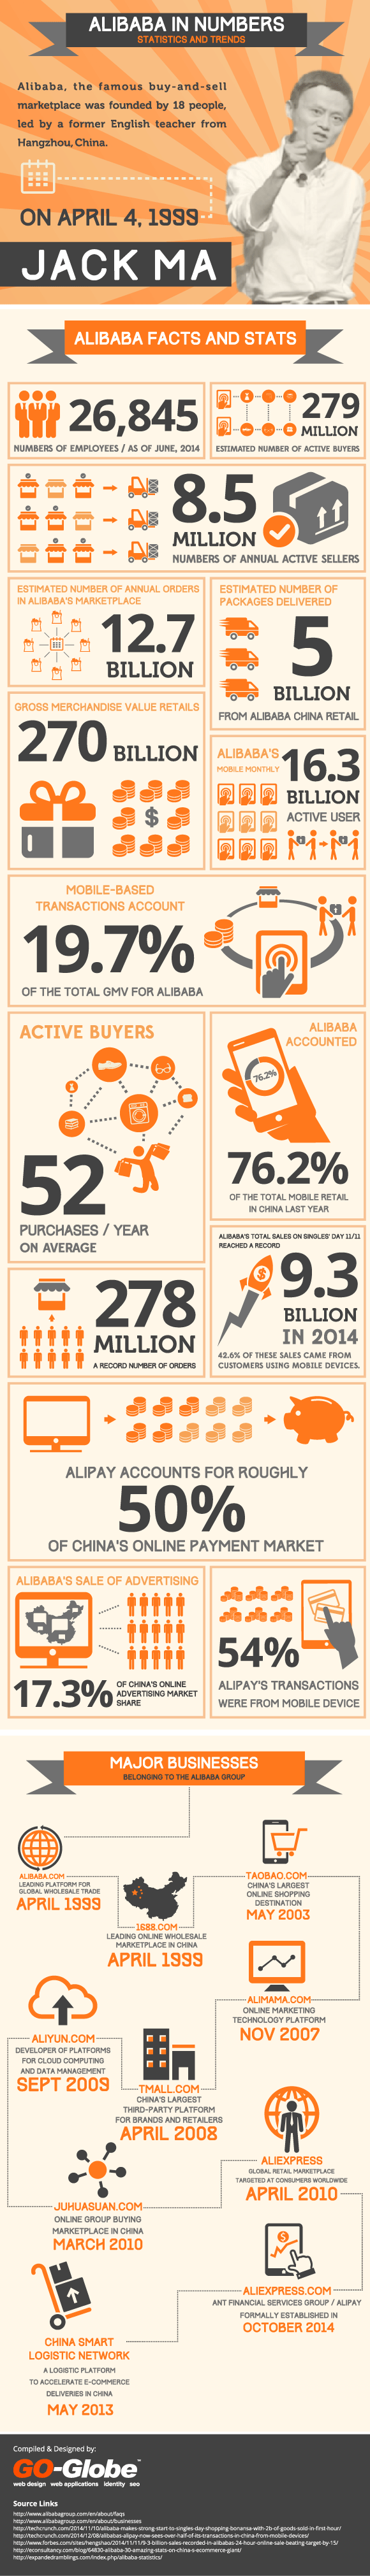 Alibaba in Numbers